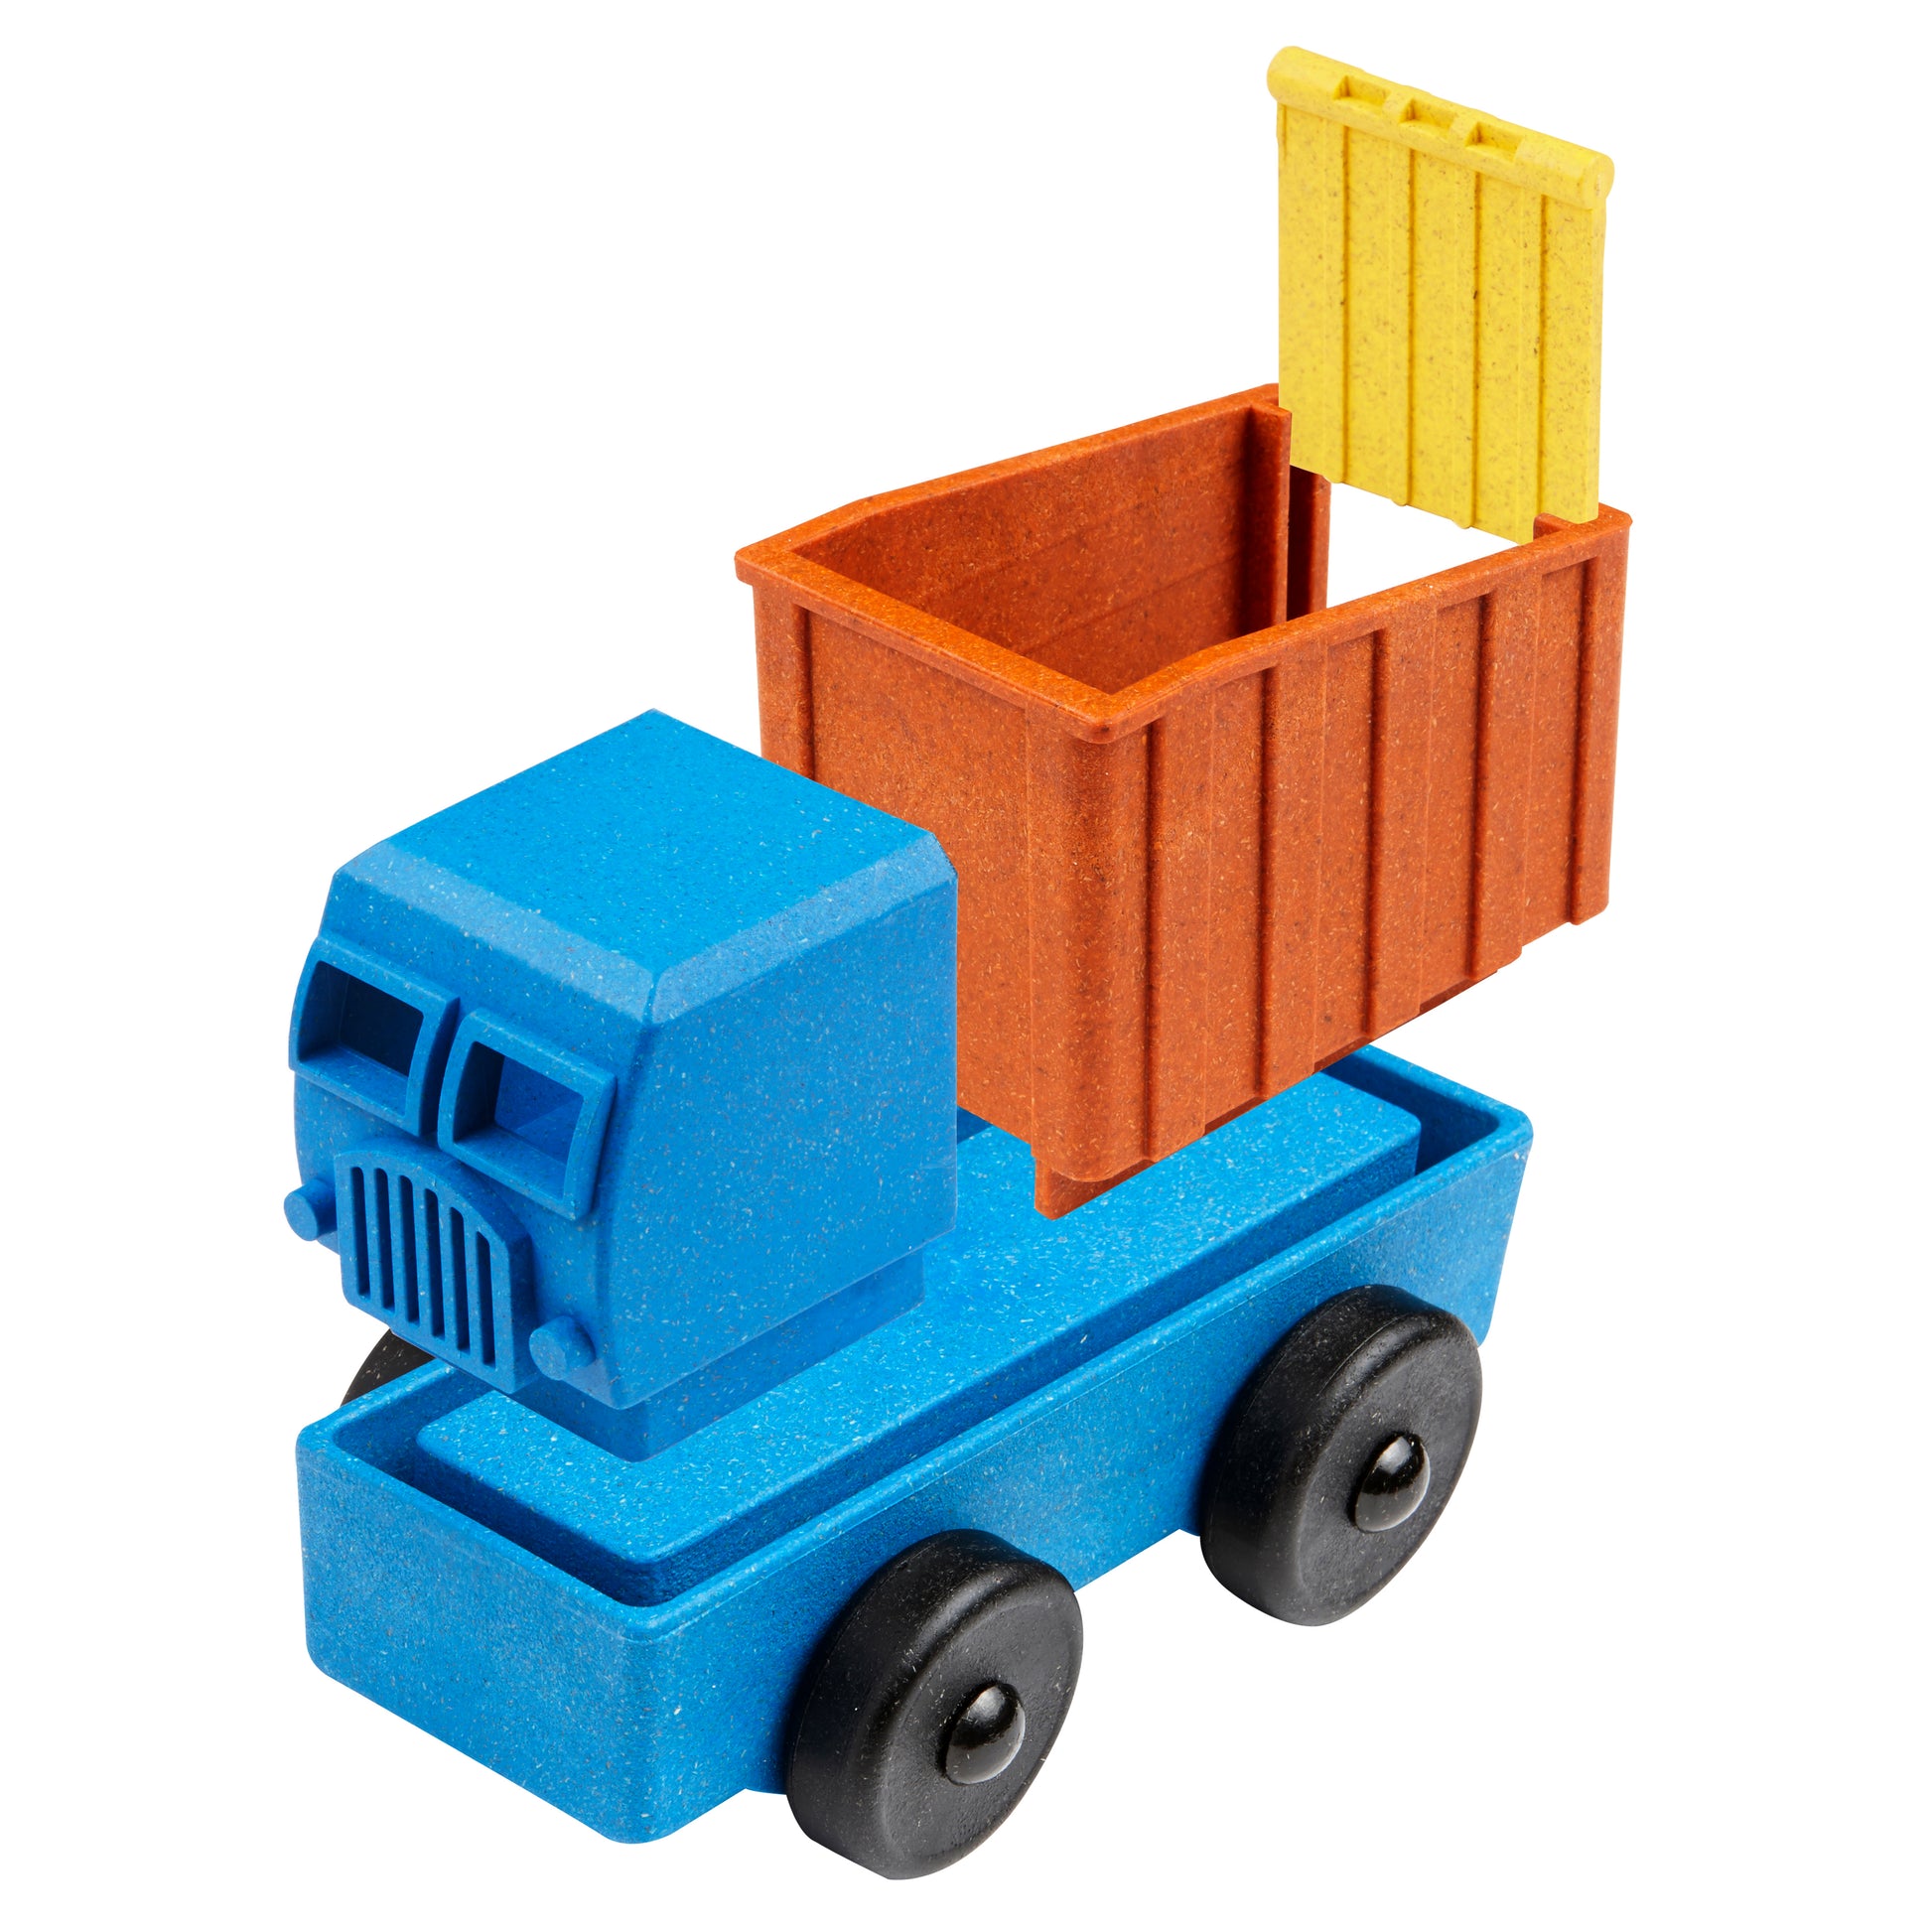 Luke's Toy Factory Toy Dump Truck puzzle pieces